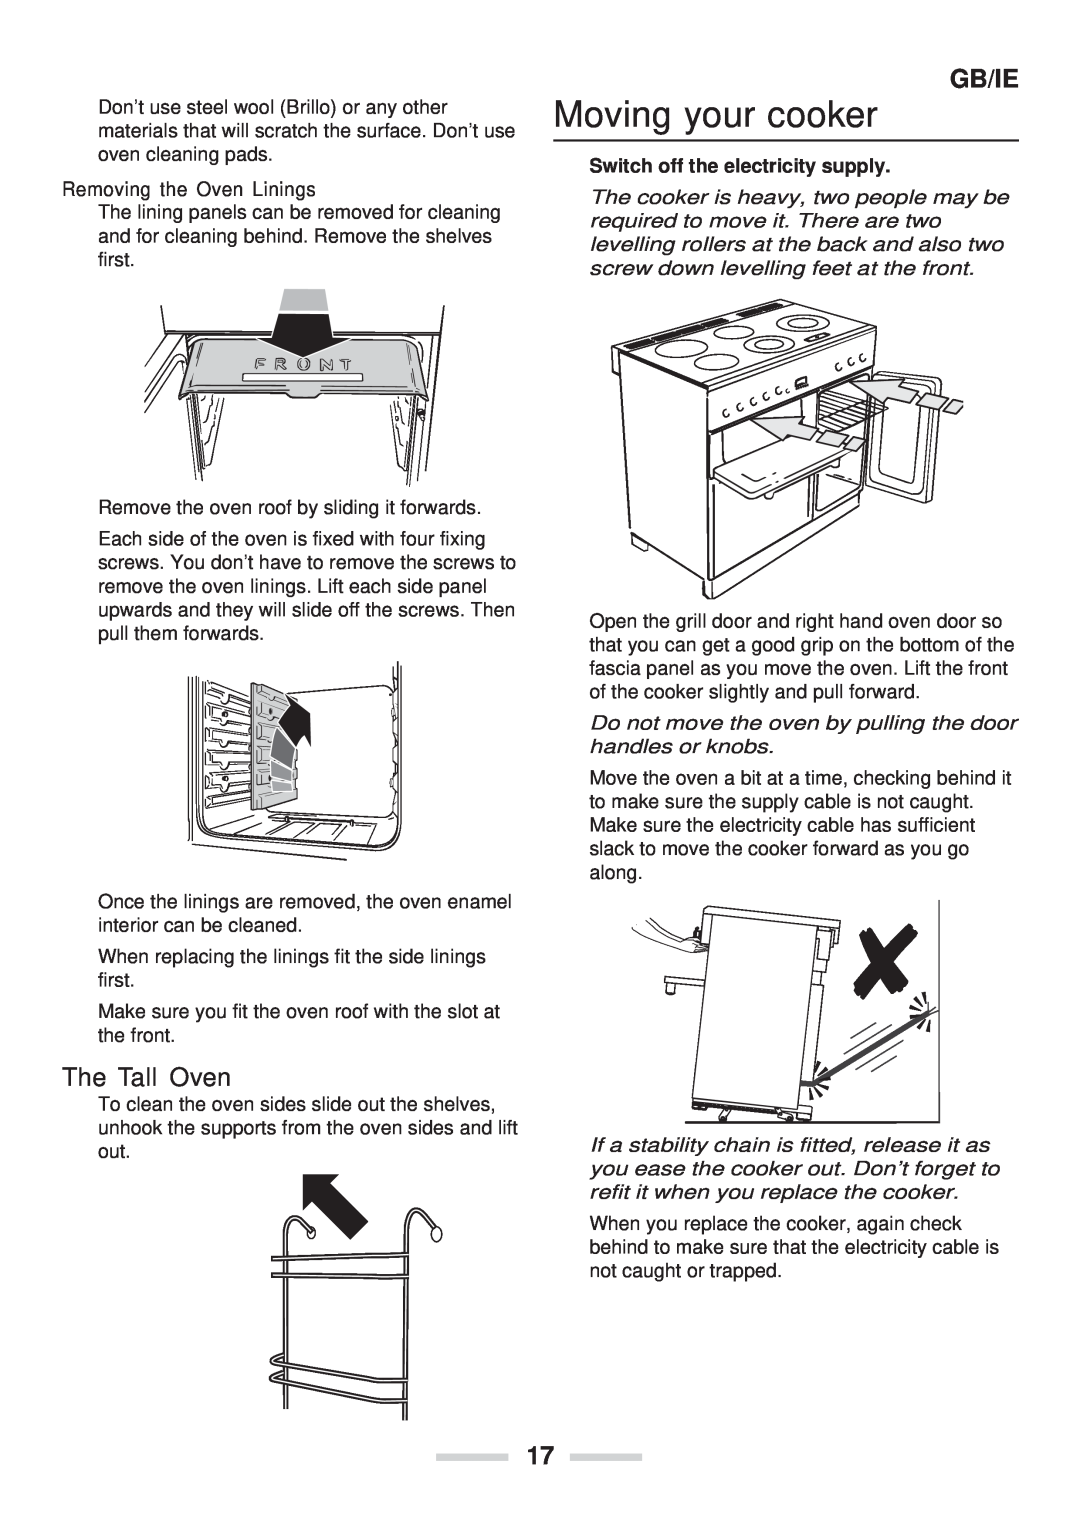 Rangemaster 90 Ceramic installation instructions Moving your cooker, The Tall Oven, Gb/Ie, Removing the Oven Linings 